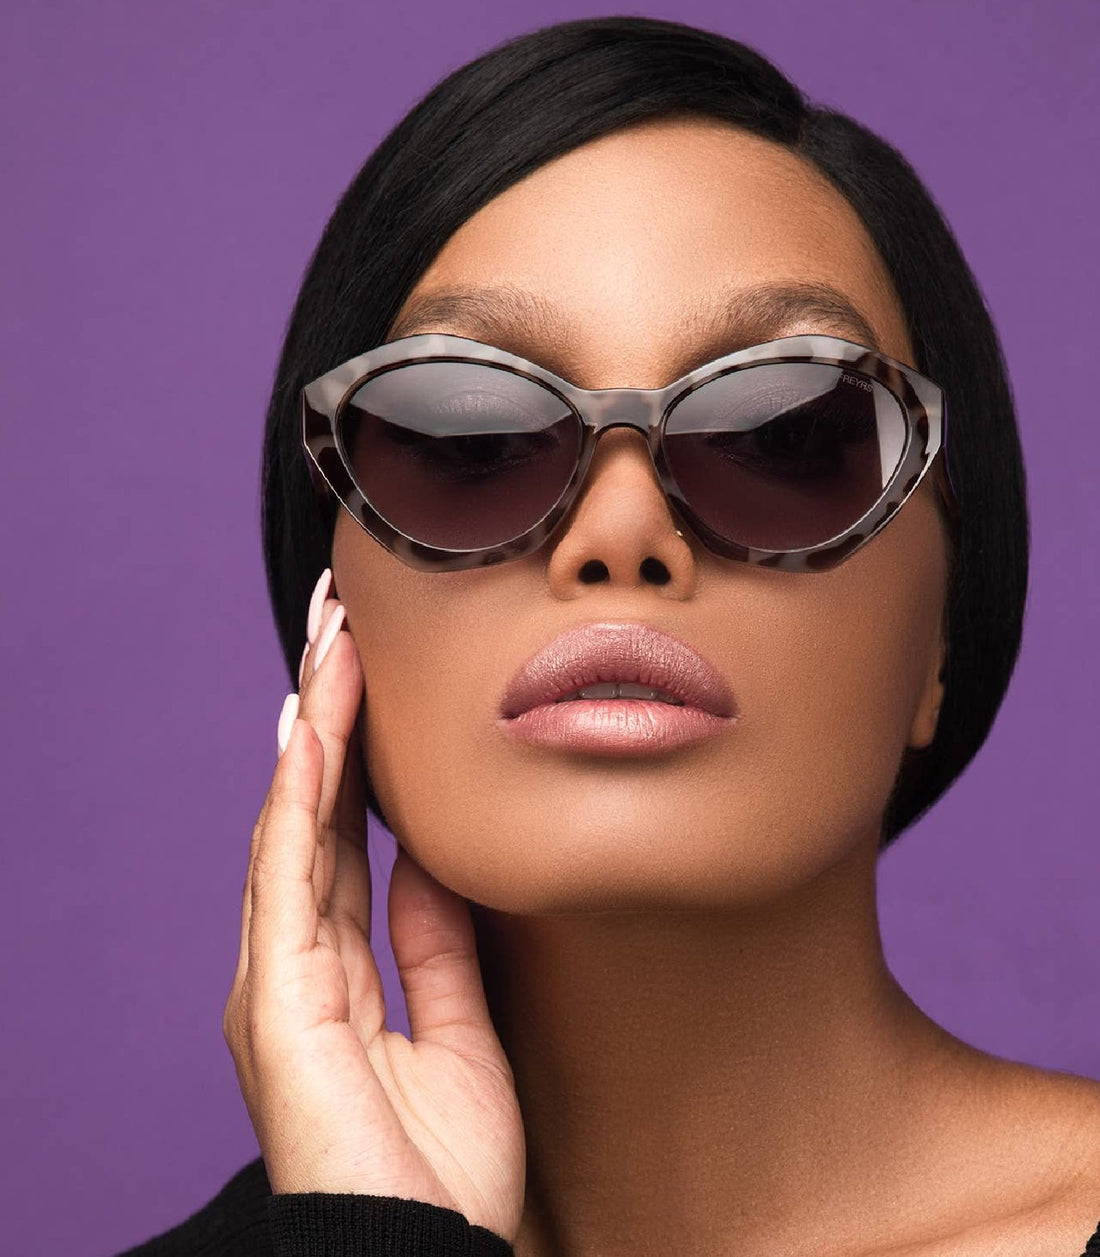 Jade Sunglasses - BY THE PEOPLE SHOP | PAUSE MORE, LIVE MORE